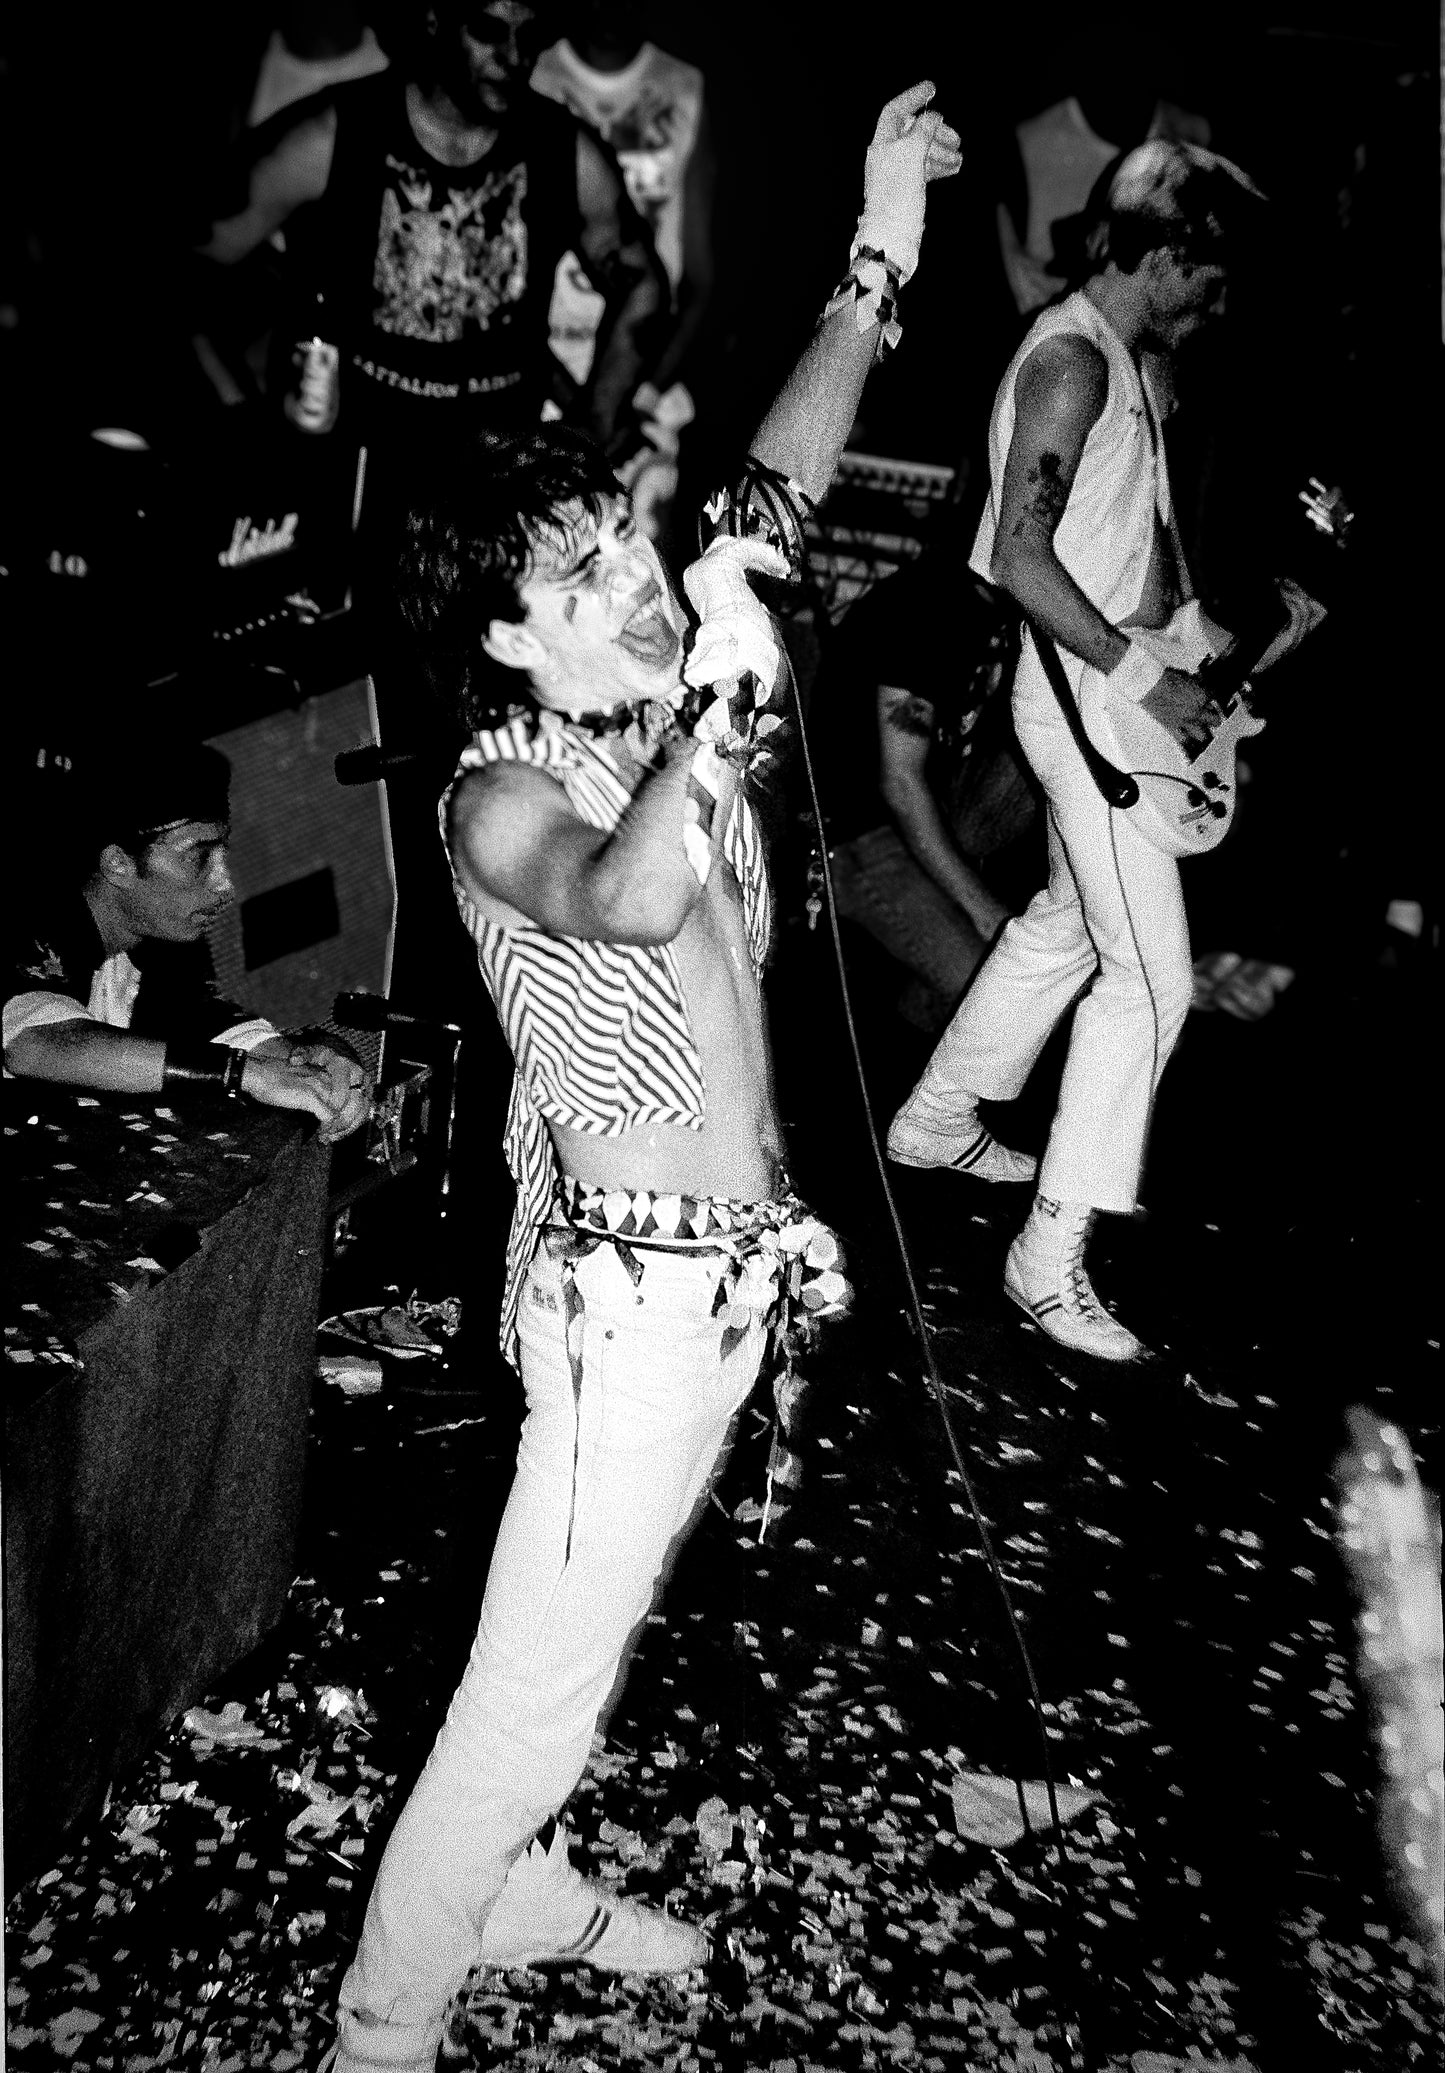 My Punk Rock Life - The Photography of Marla Watson (paperback edition)